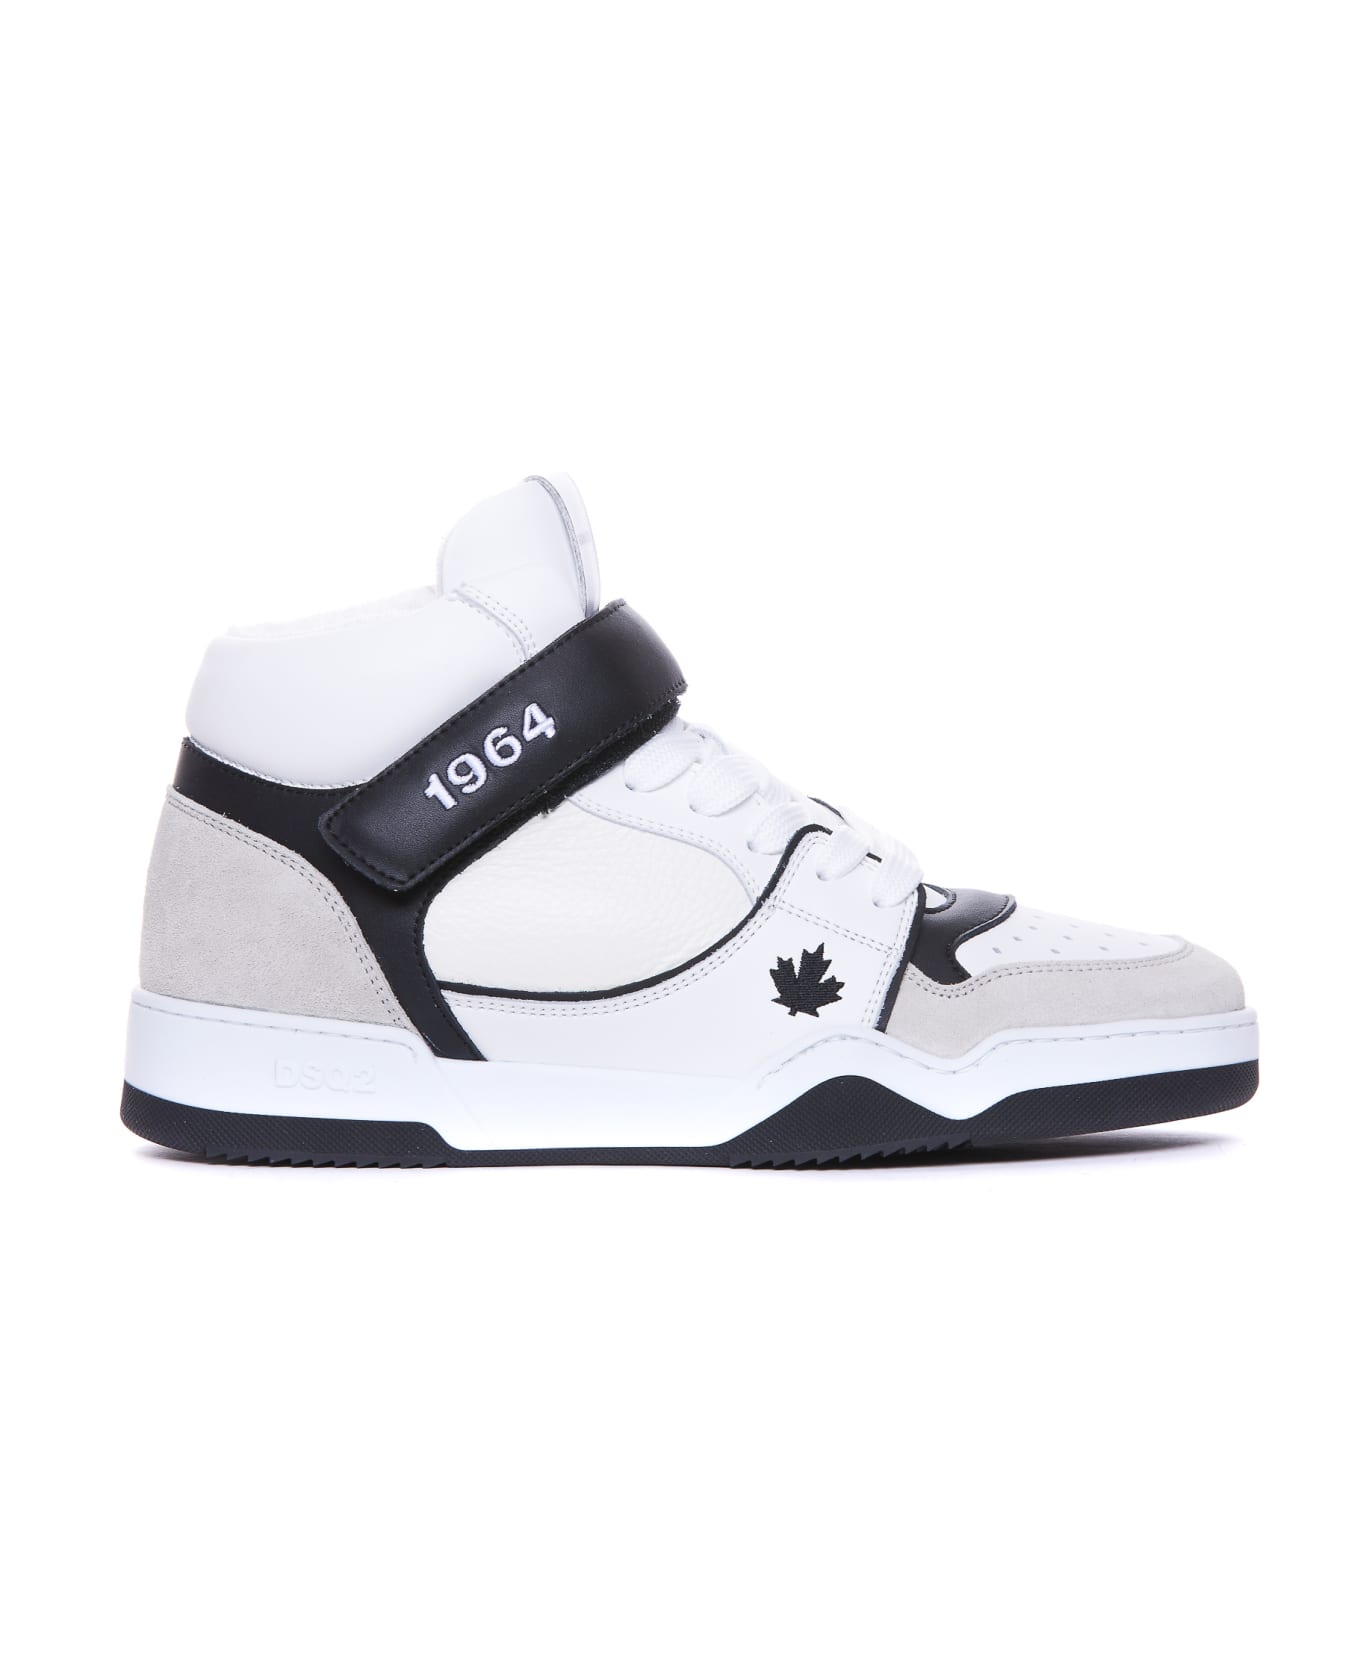 Dsquared2 Spiker Sneakers - White